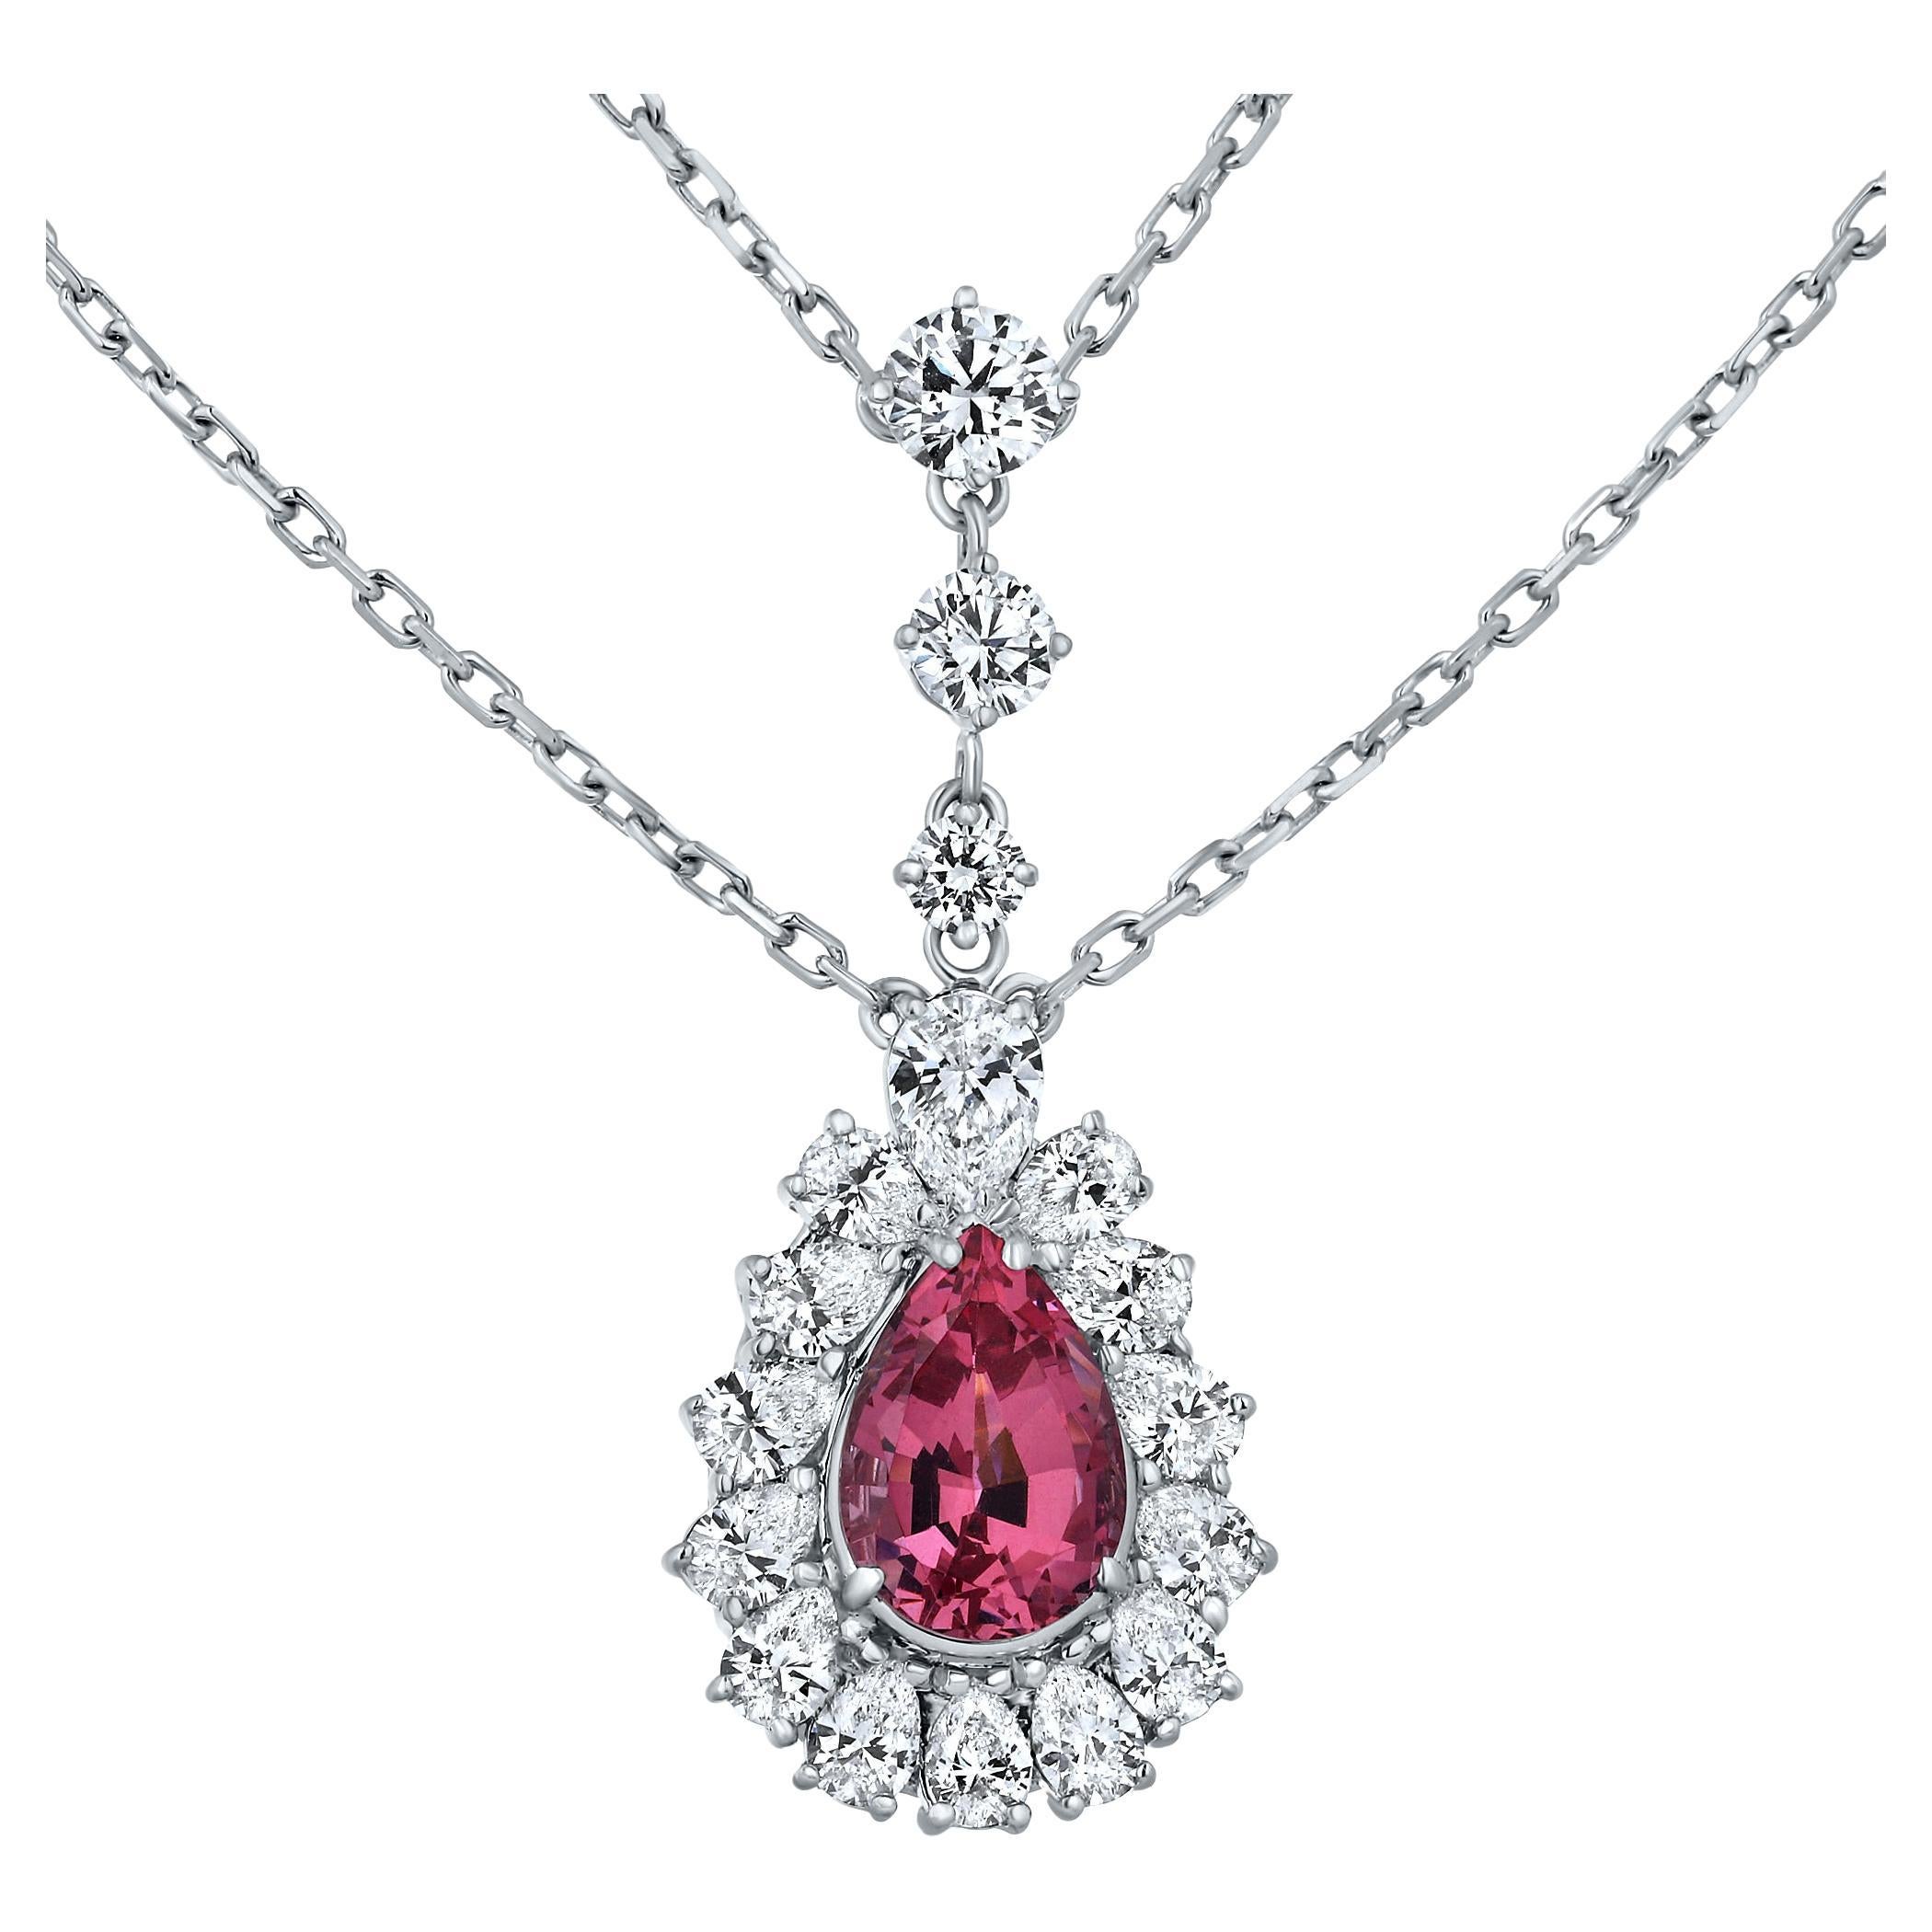 8.20 Carat Rare Pink Spinel Gemstone and Diamonds Necklace in 18K White Gold